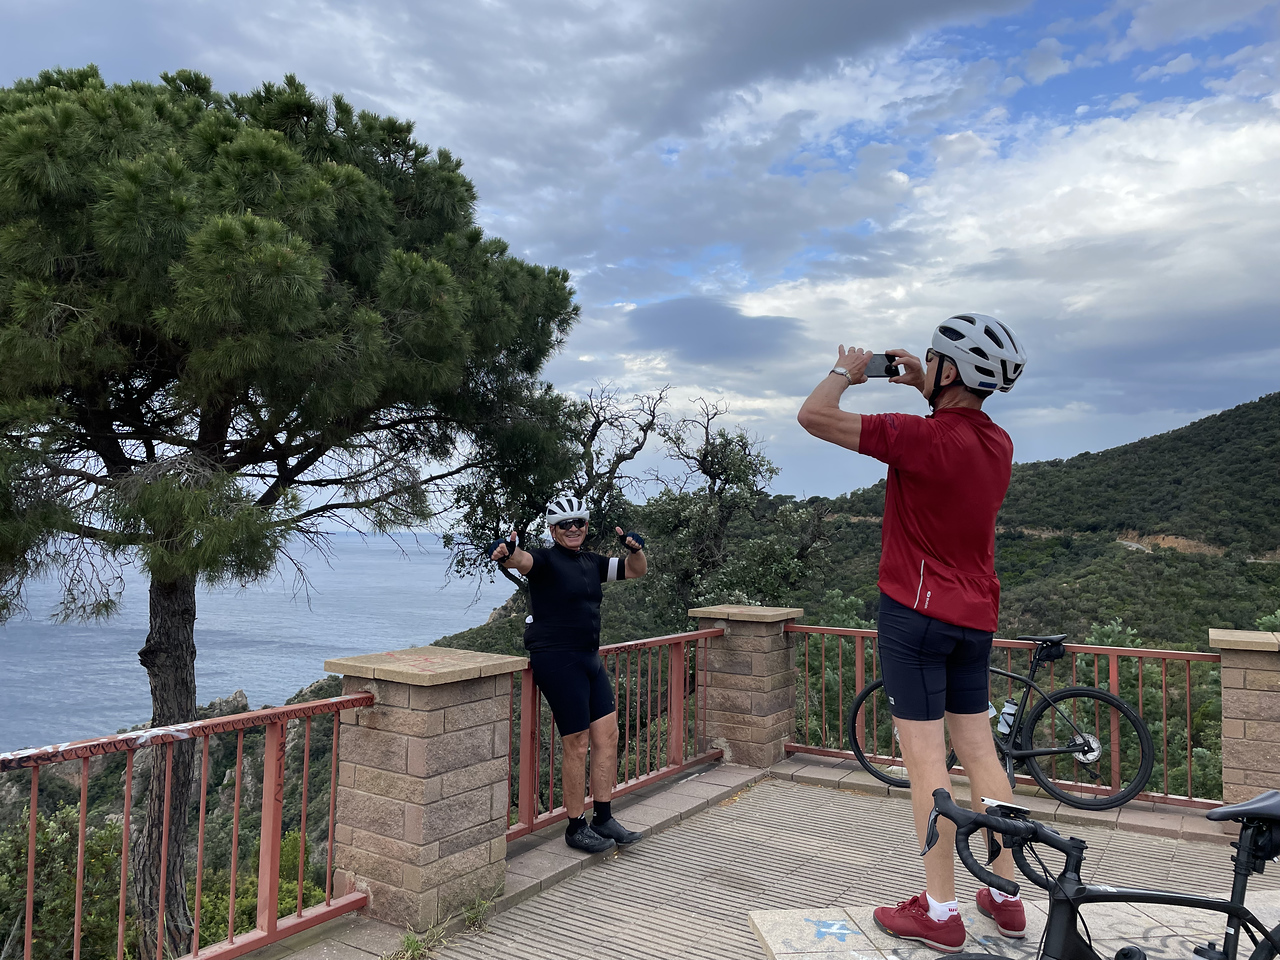 one cyclist taking a photo of another cyclist who is posing on a gate in Costa Brava with the sea in the background